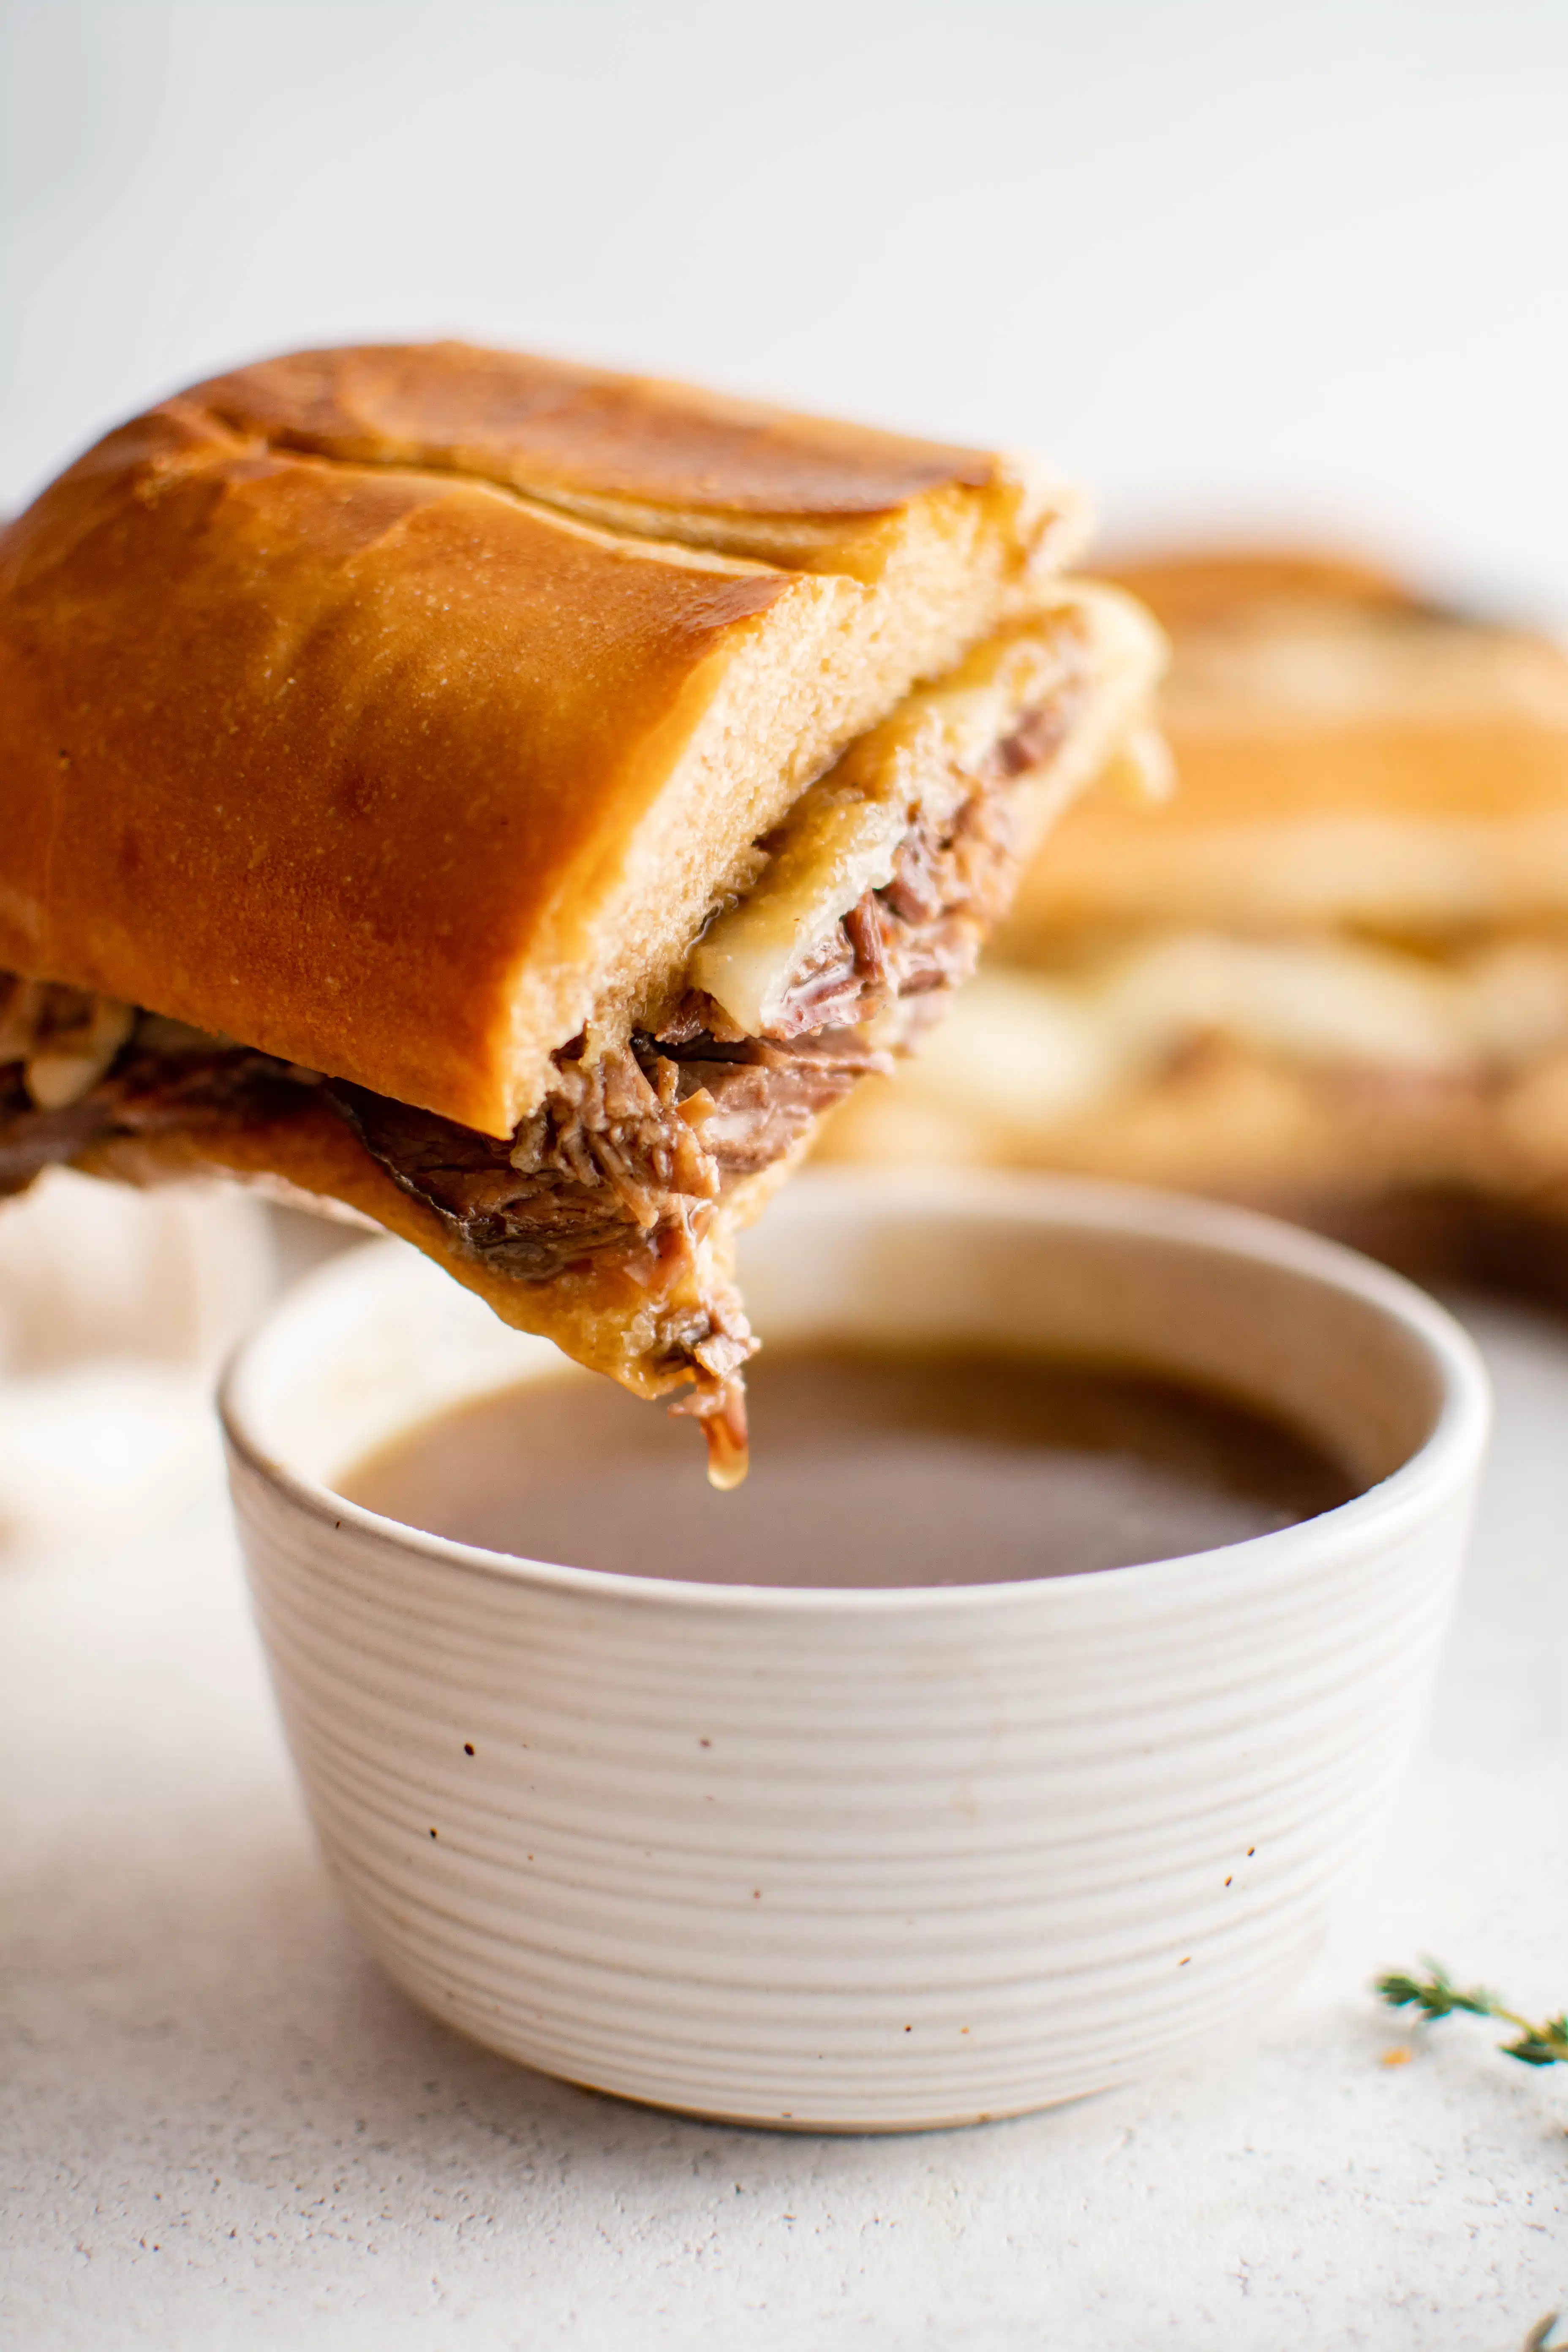 Half of a French dip sandwich dipped into a bowl filled with au jus.